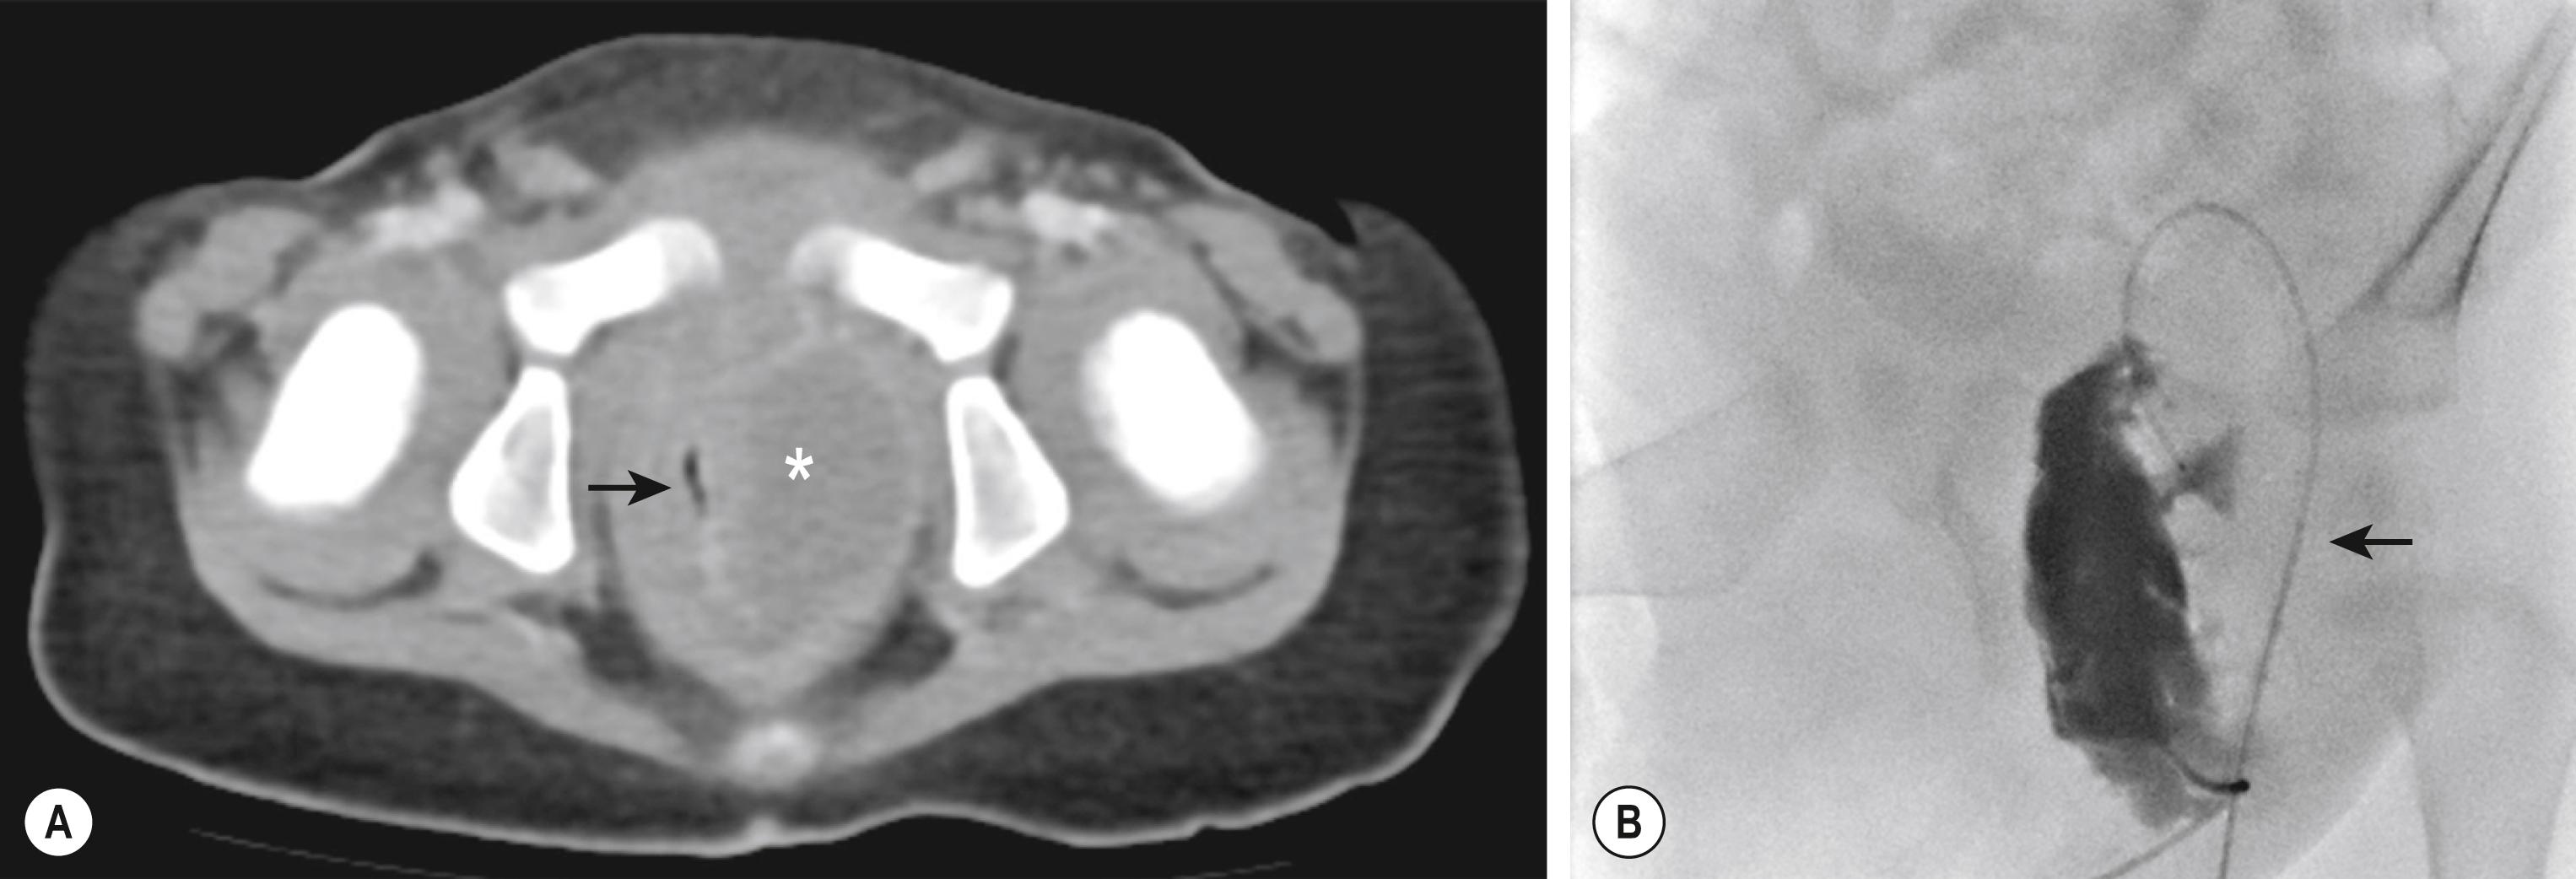 Fig. 37.2, (A) CT image of a complex ischiorectal abscess (asterisk) in an adolescent with Crohn disease. Note the rectum (arrow) is markedly compressed. (B) This contrast study identifies the large abscess cavity. A drain was positioned over the guide wire (arrow) and left in situ to drain the abscess cavity.